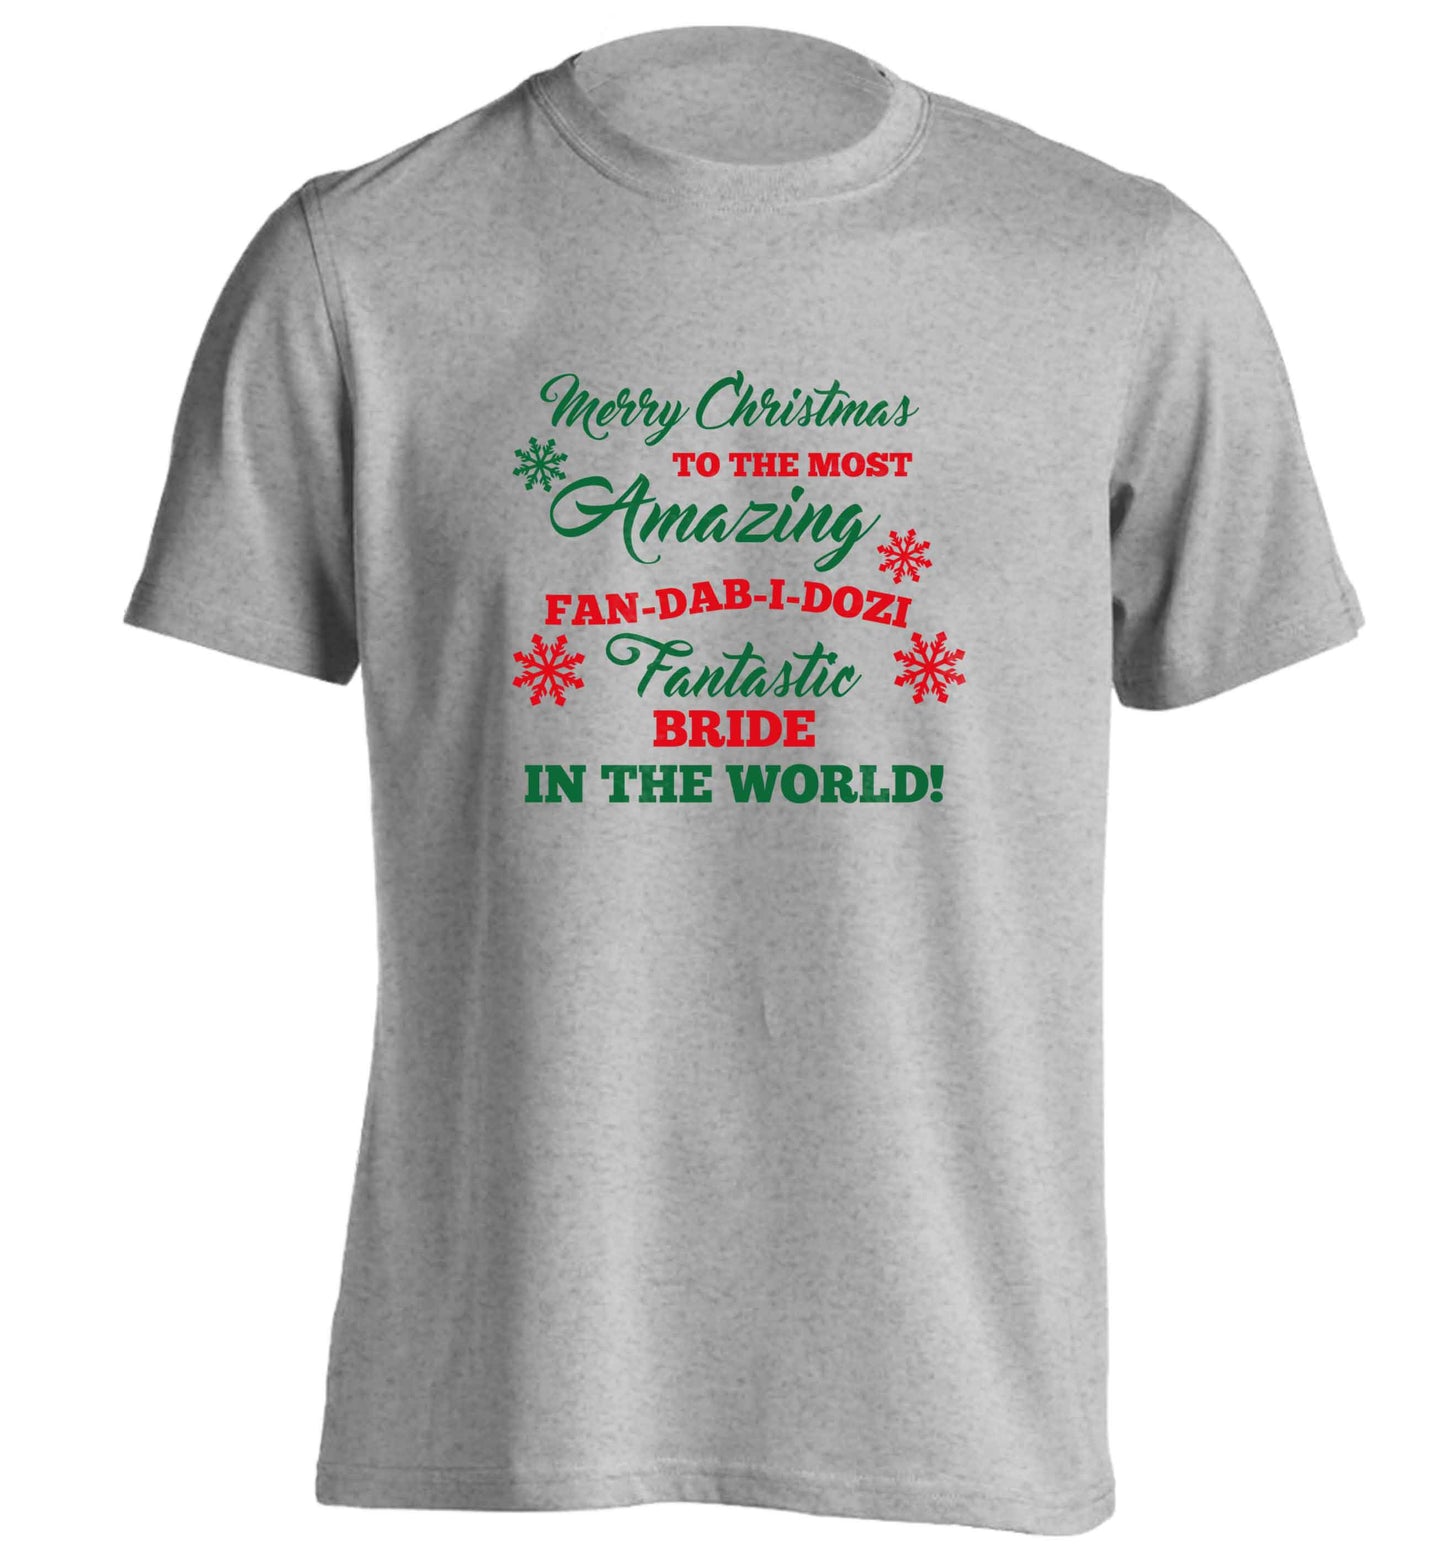 Merry Christmas to the most amazing bride in the world! adults unisex grey Tshirt 2XL